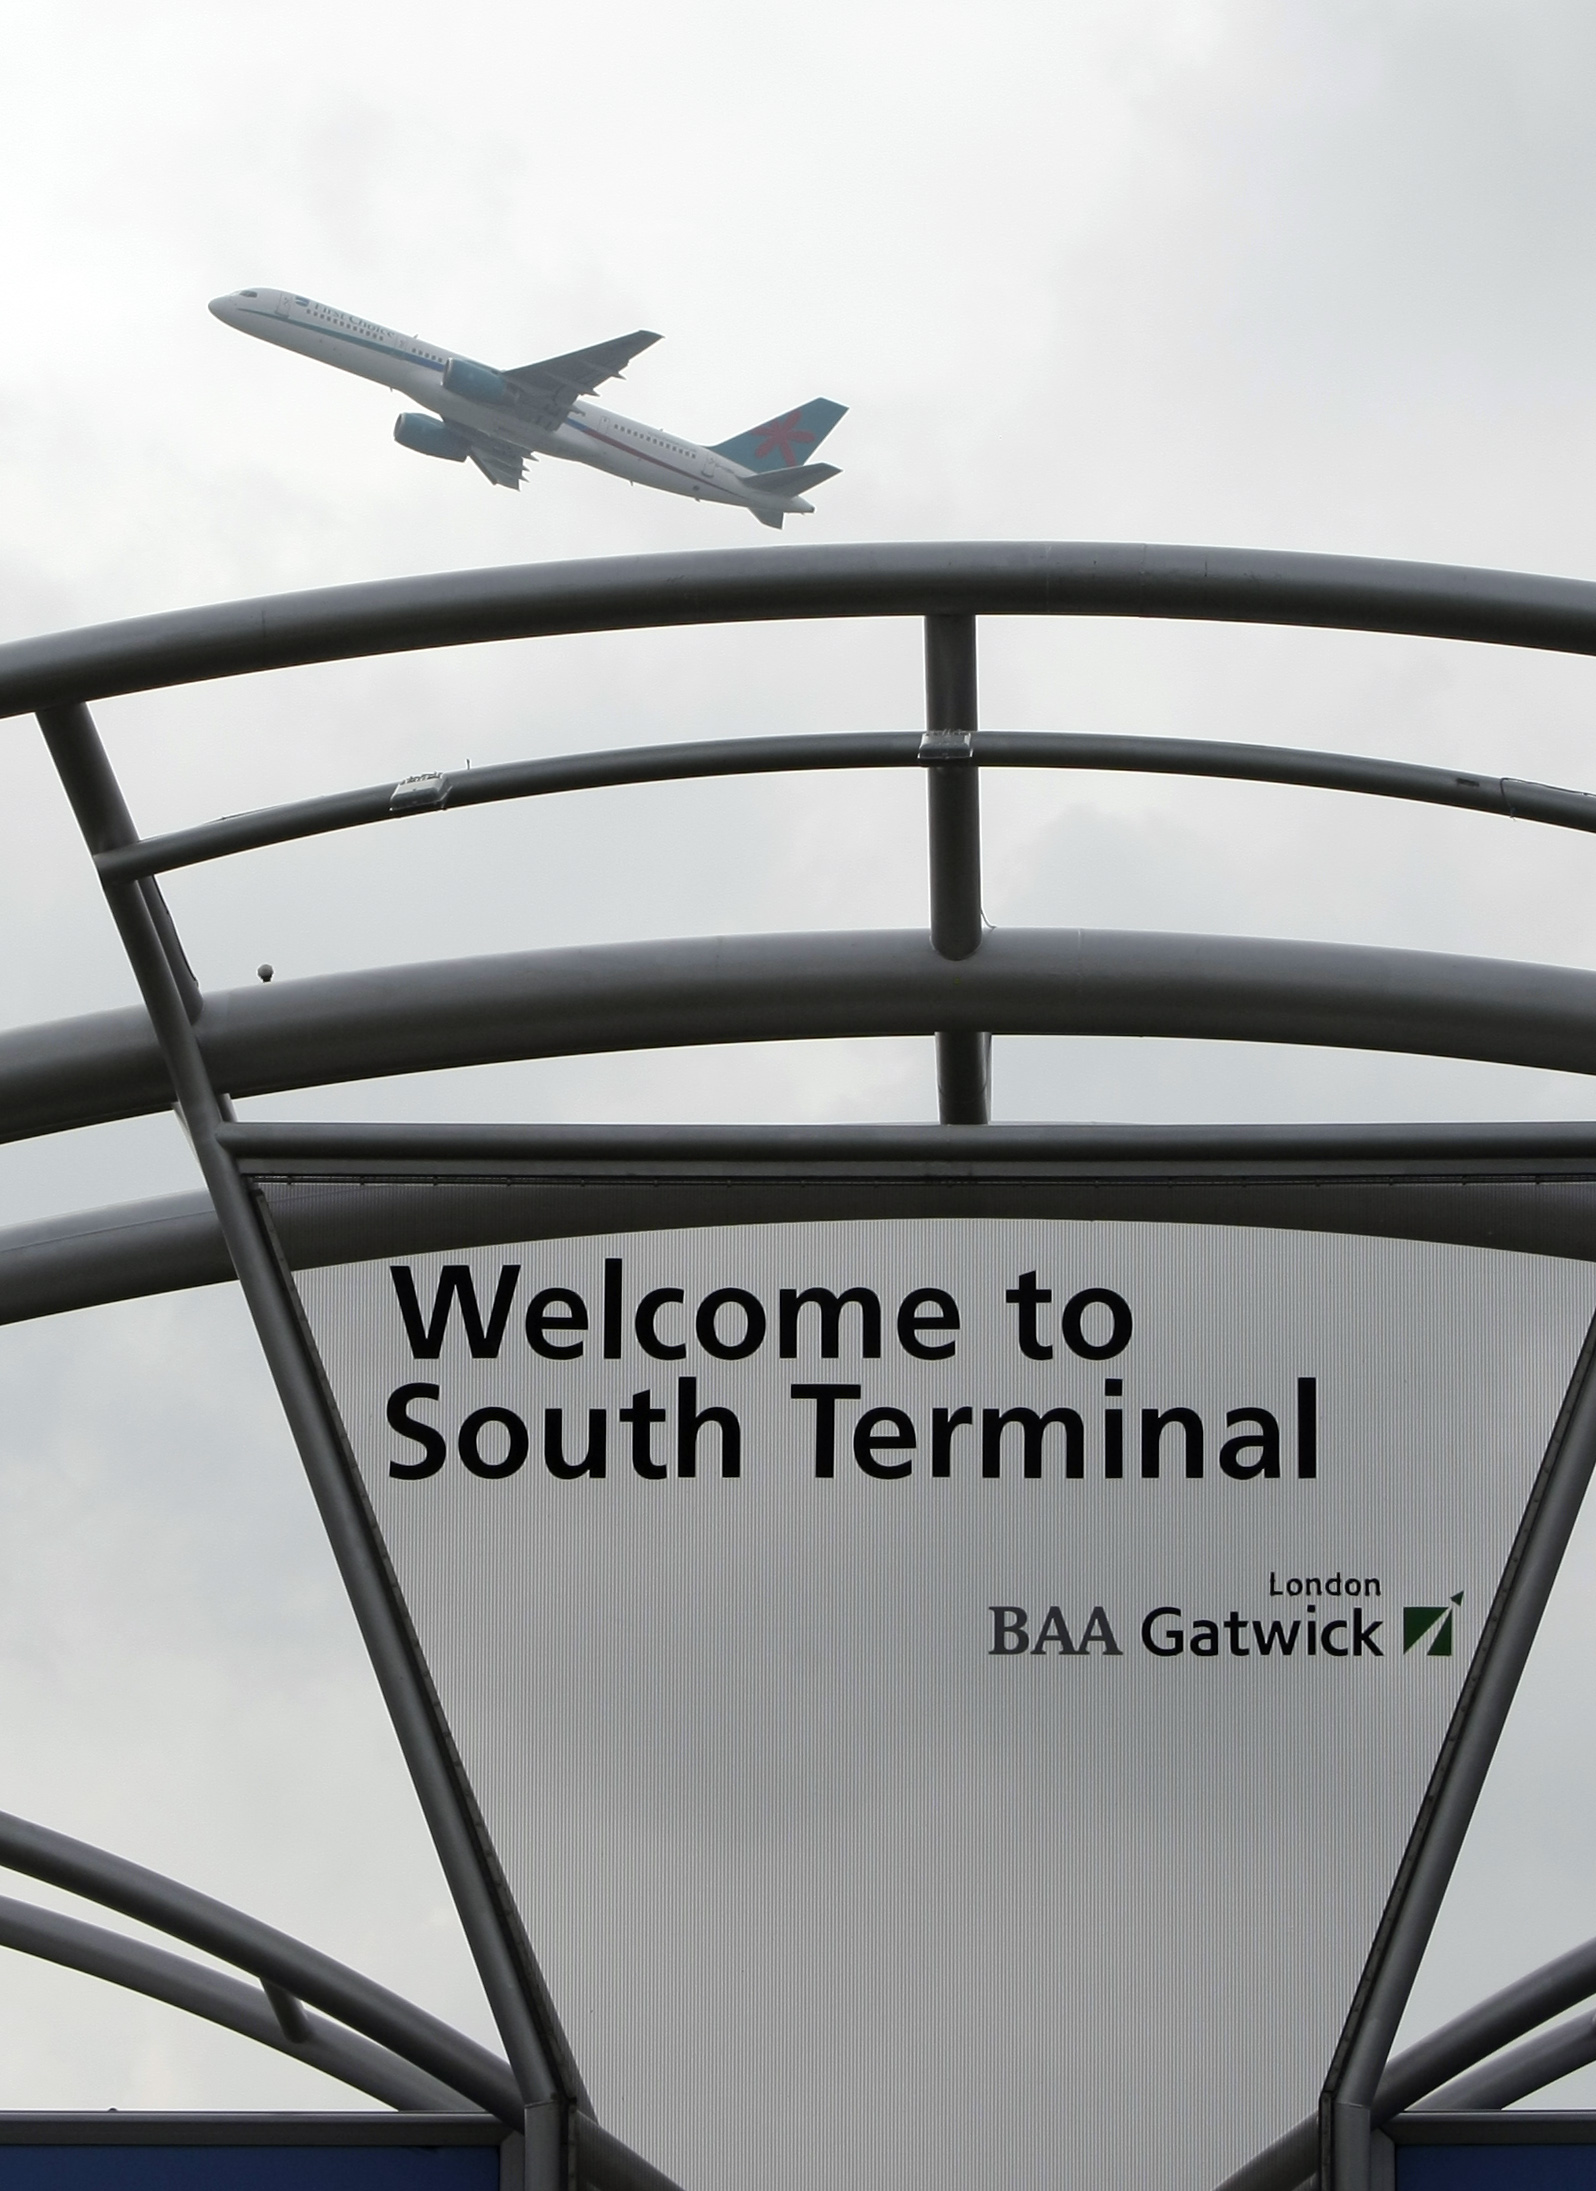 A sign at Gatwick airport in London, England.